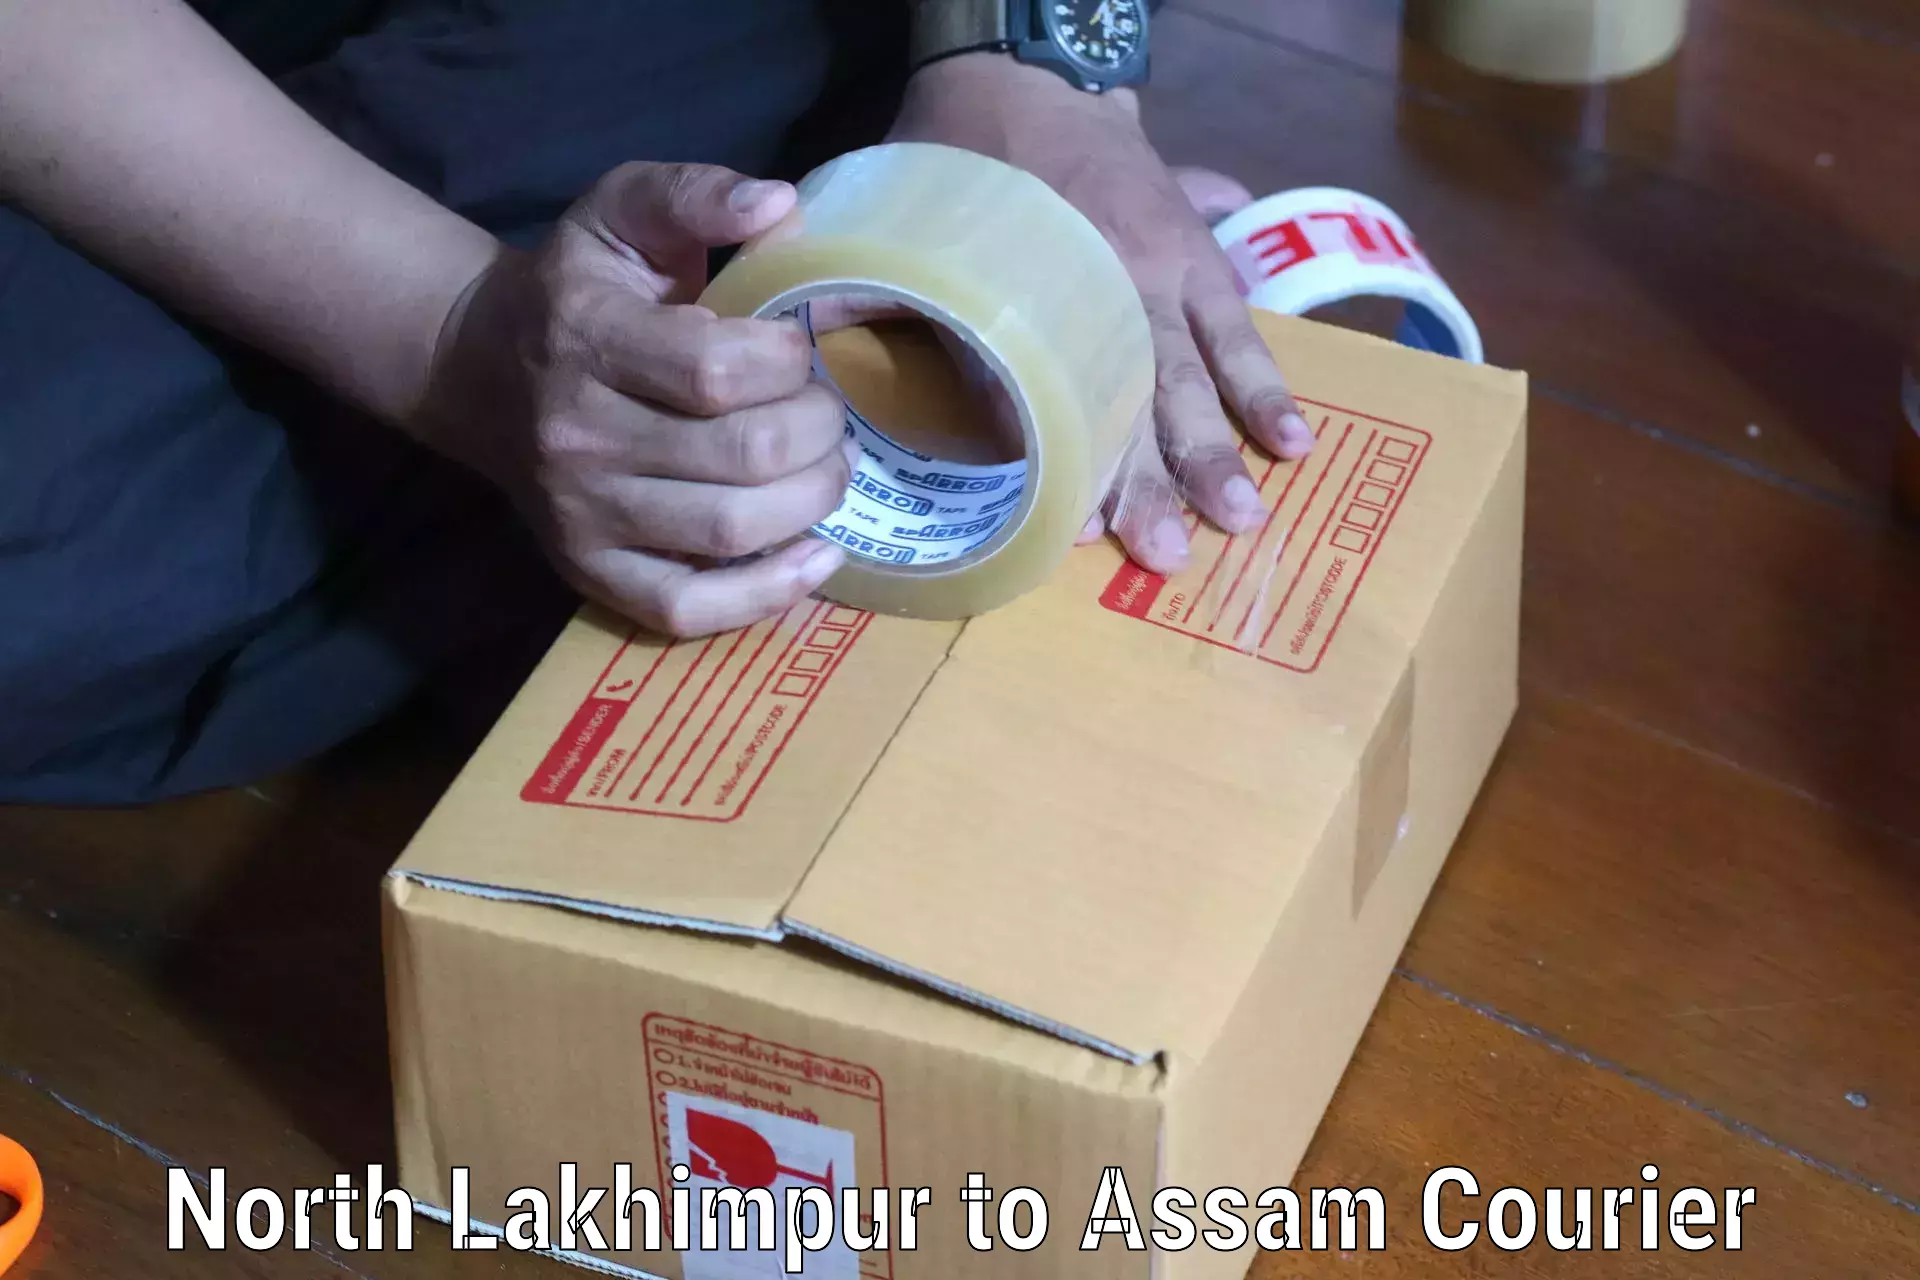 On-call courier service North Lakhimpur to Agomani